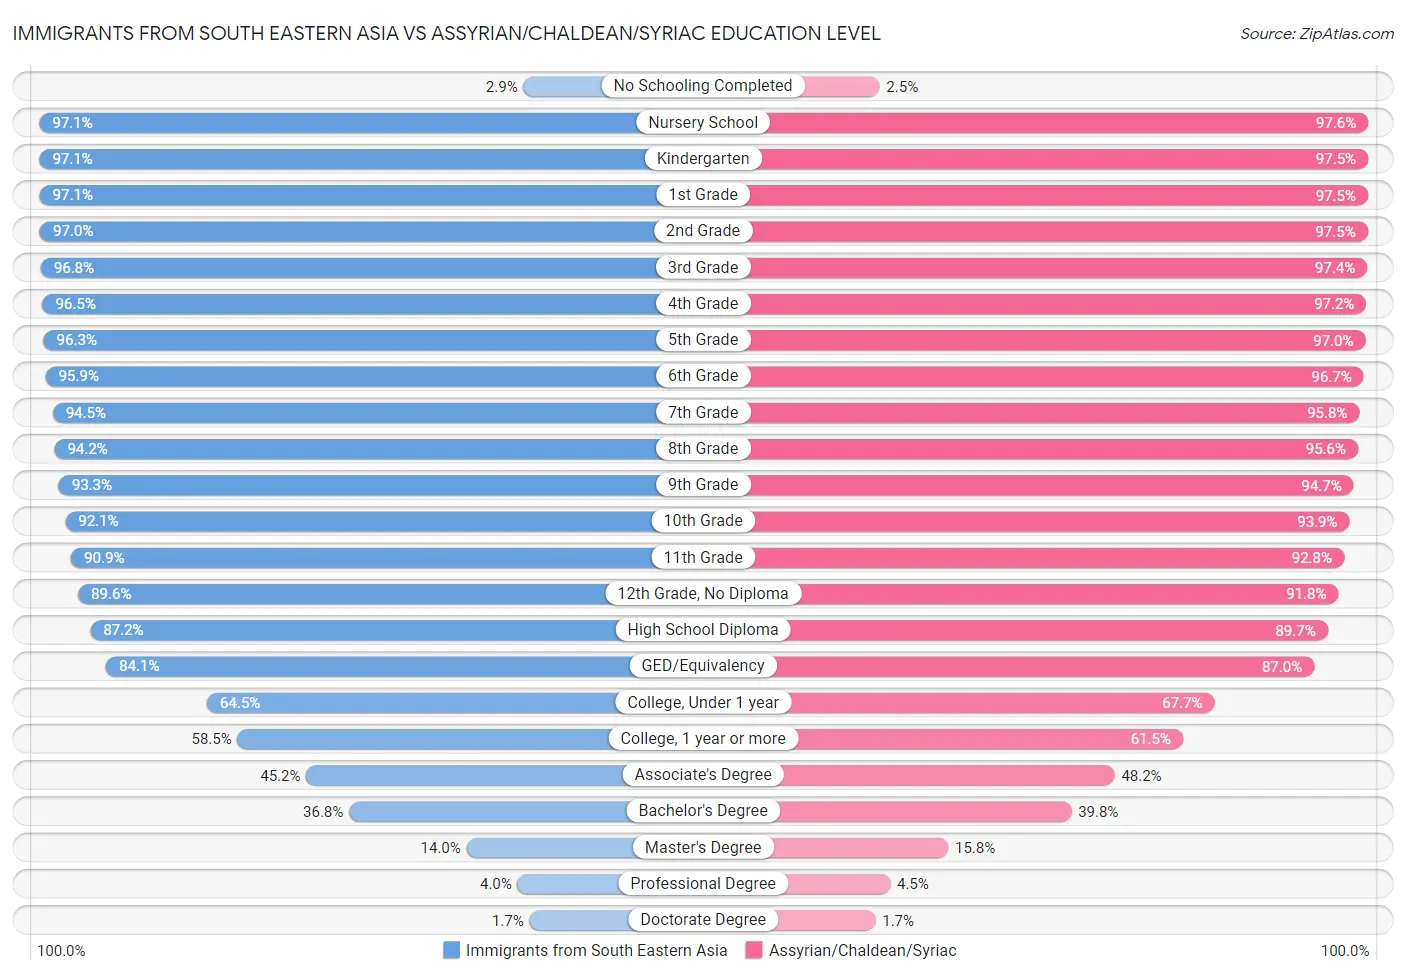 Immigrants from South Eastern Asia vs Assyrian/Chaldean/Syriac Education Level